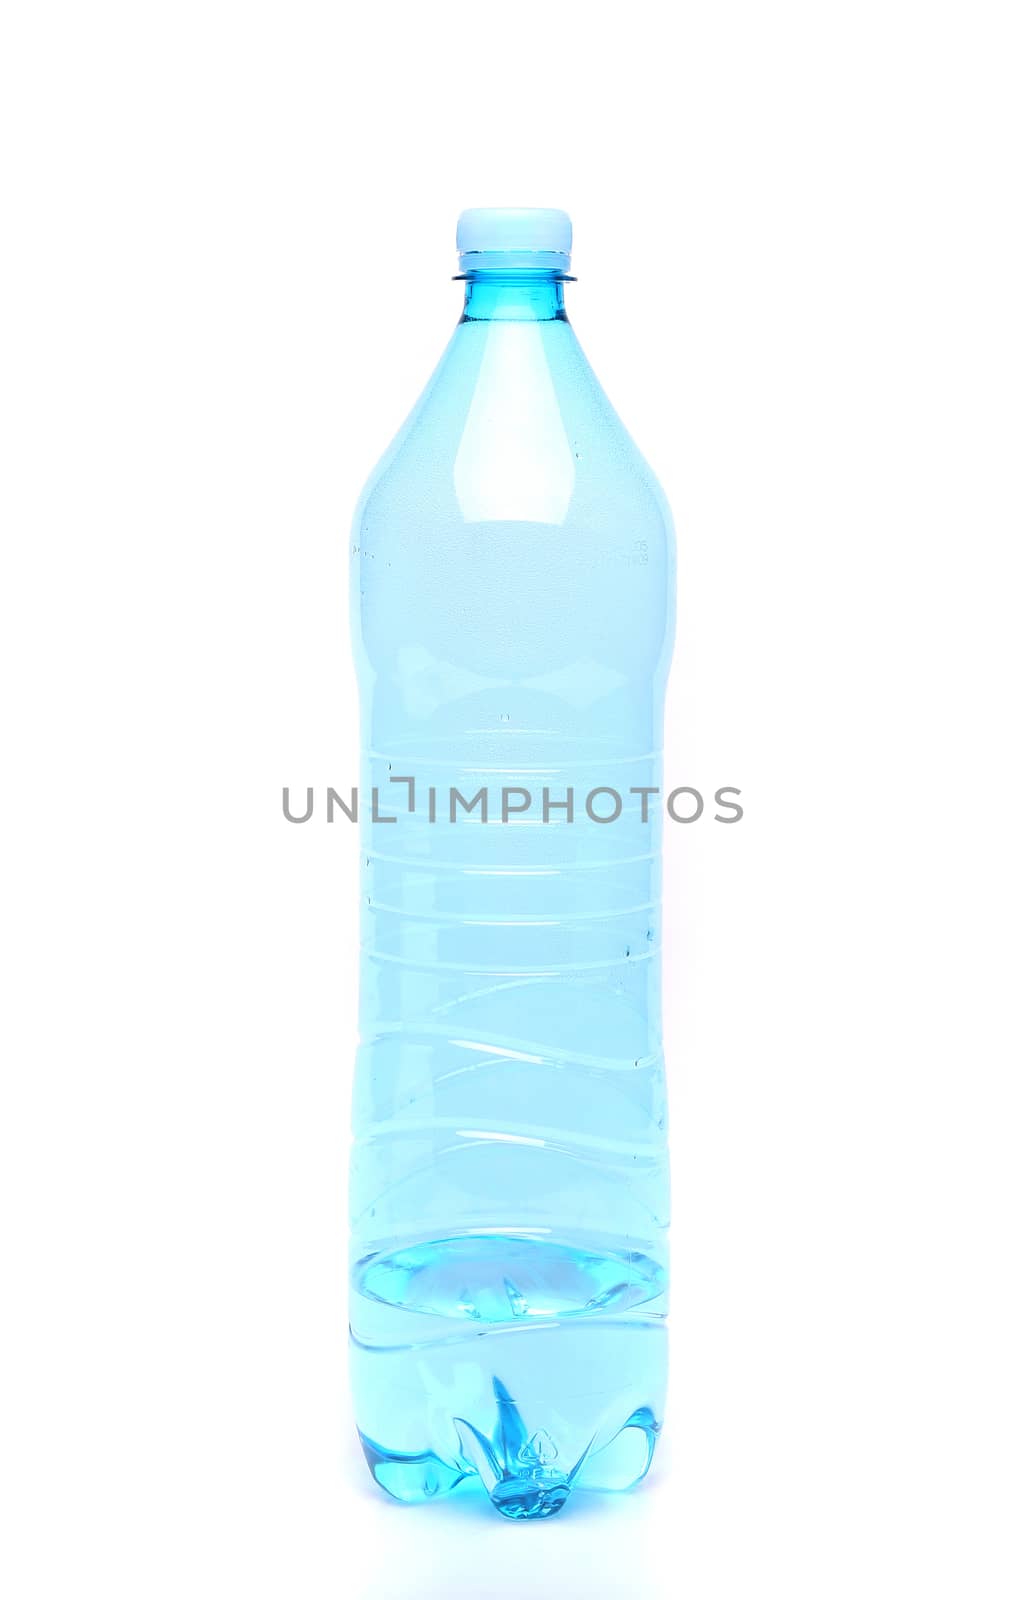 Plastic bottle of drinking water on white background